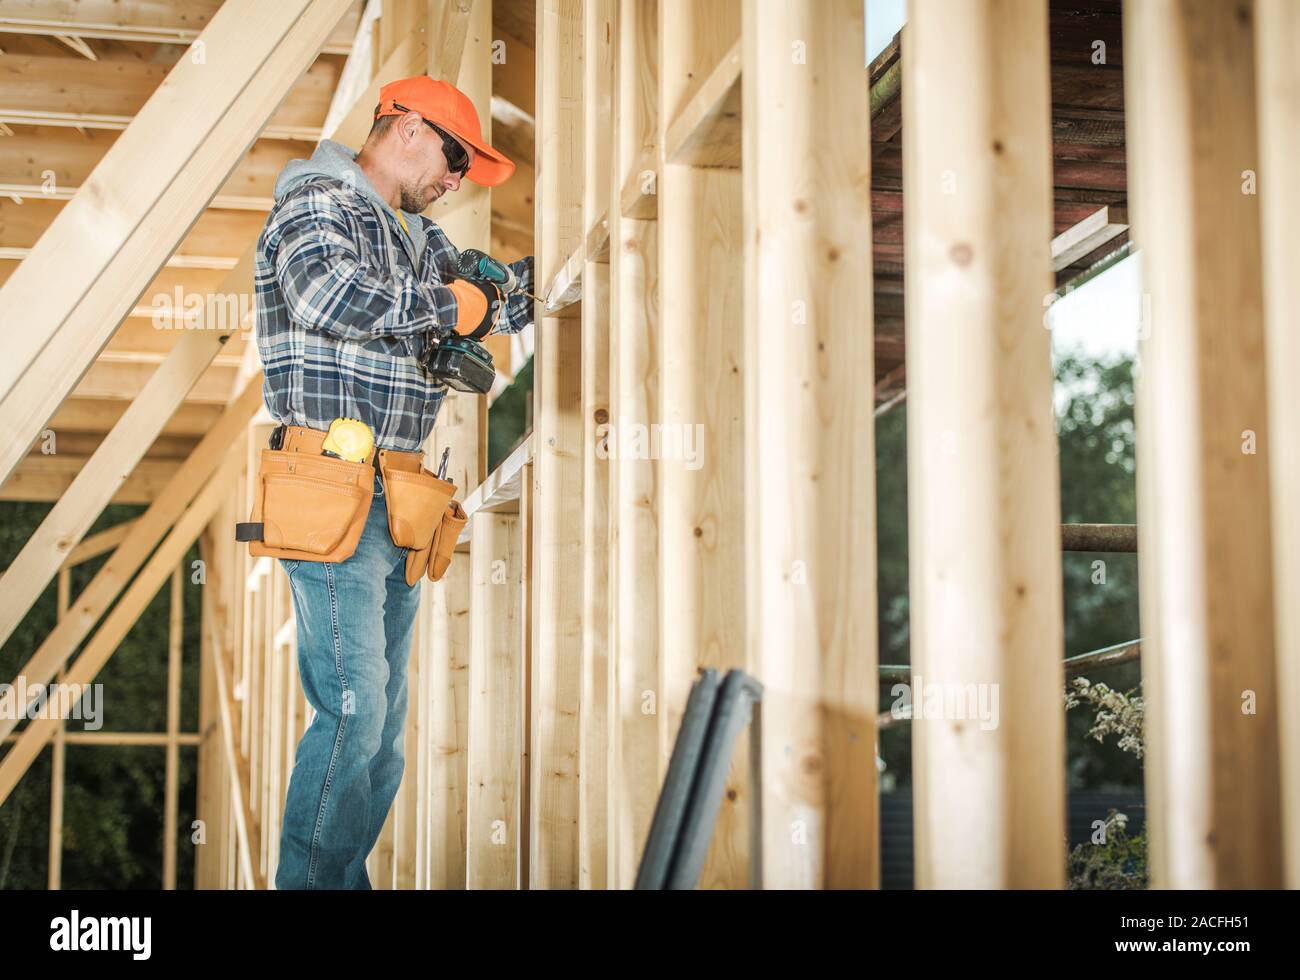 Wood House Frame Construction and the Contractor Worker in His 30s with Drill Driver Attaching Wooden Frame Elements. Industrial Theme. Stock Photo